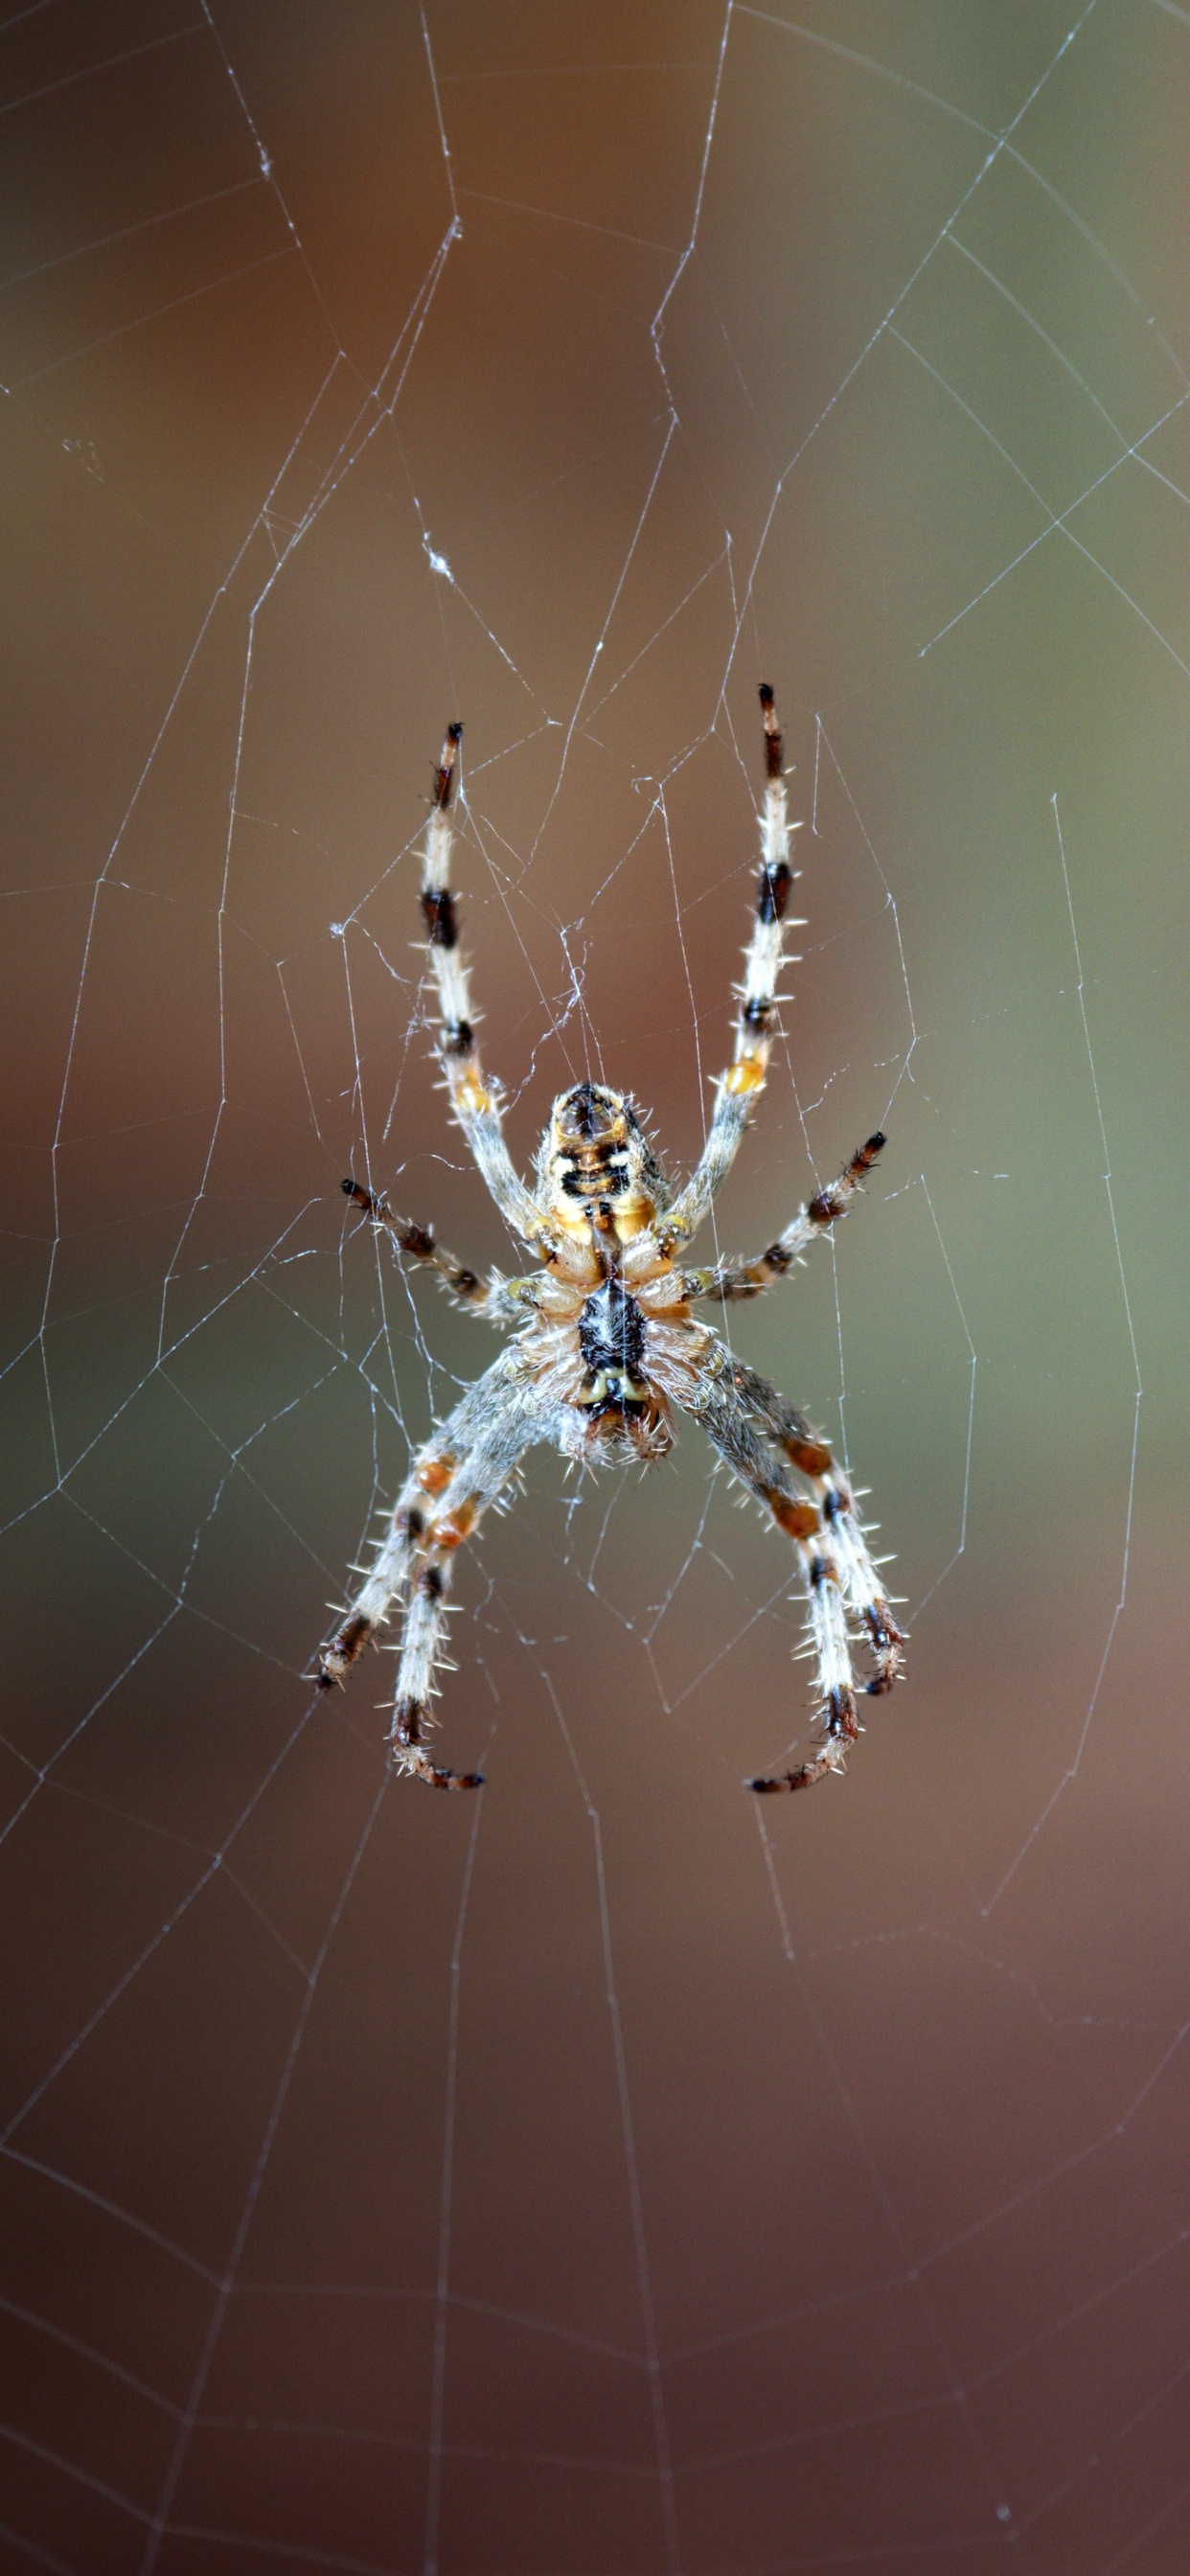 Brown and Black Spider on Web in Close up Photography During Daytime. Wallpaper in 1242x2688 Resolution